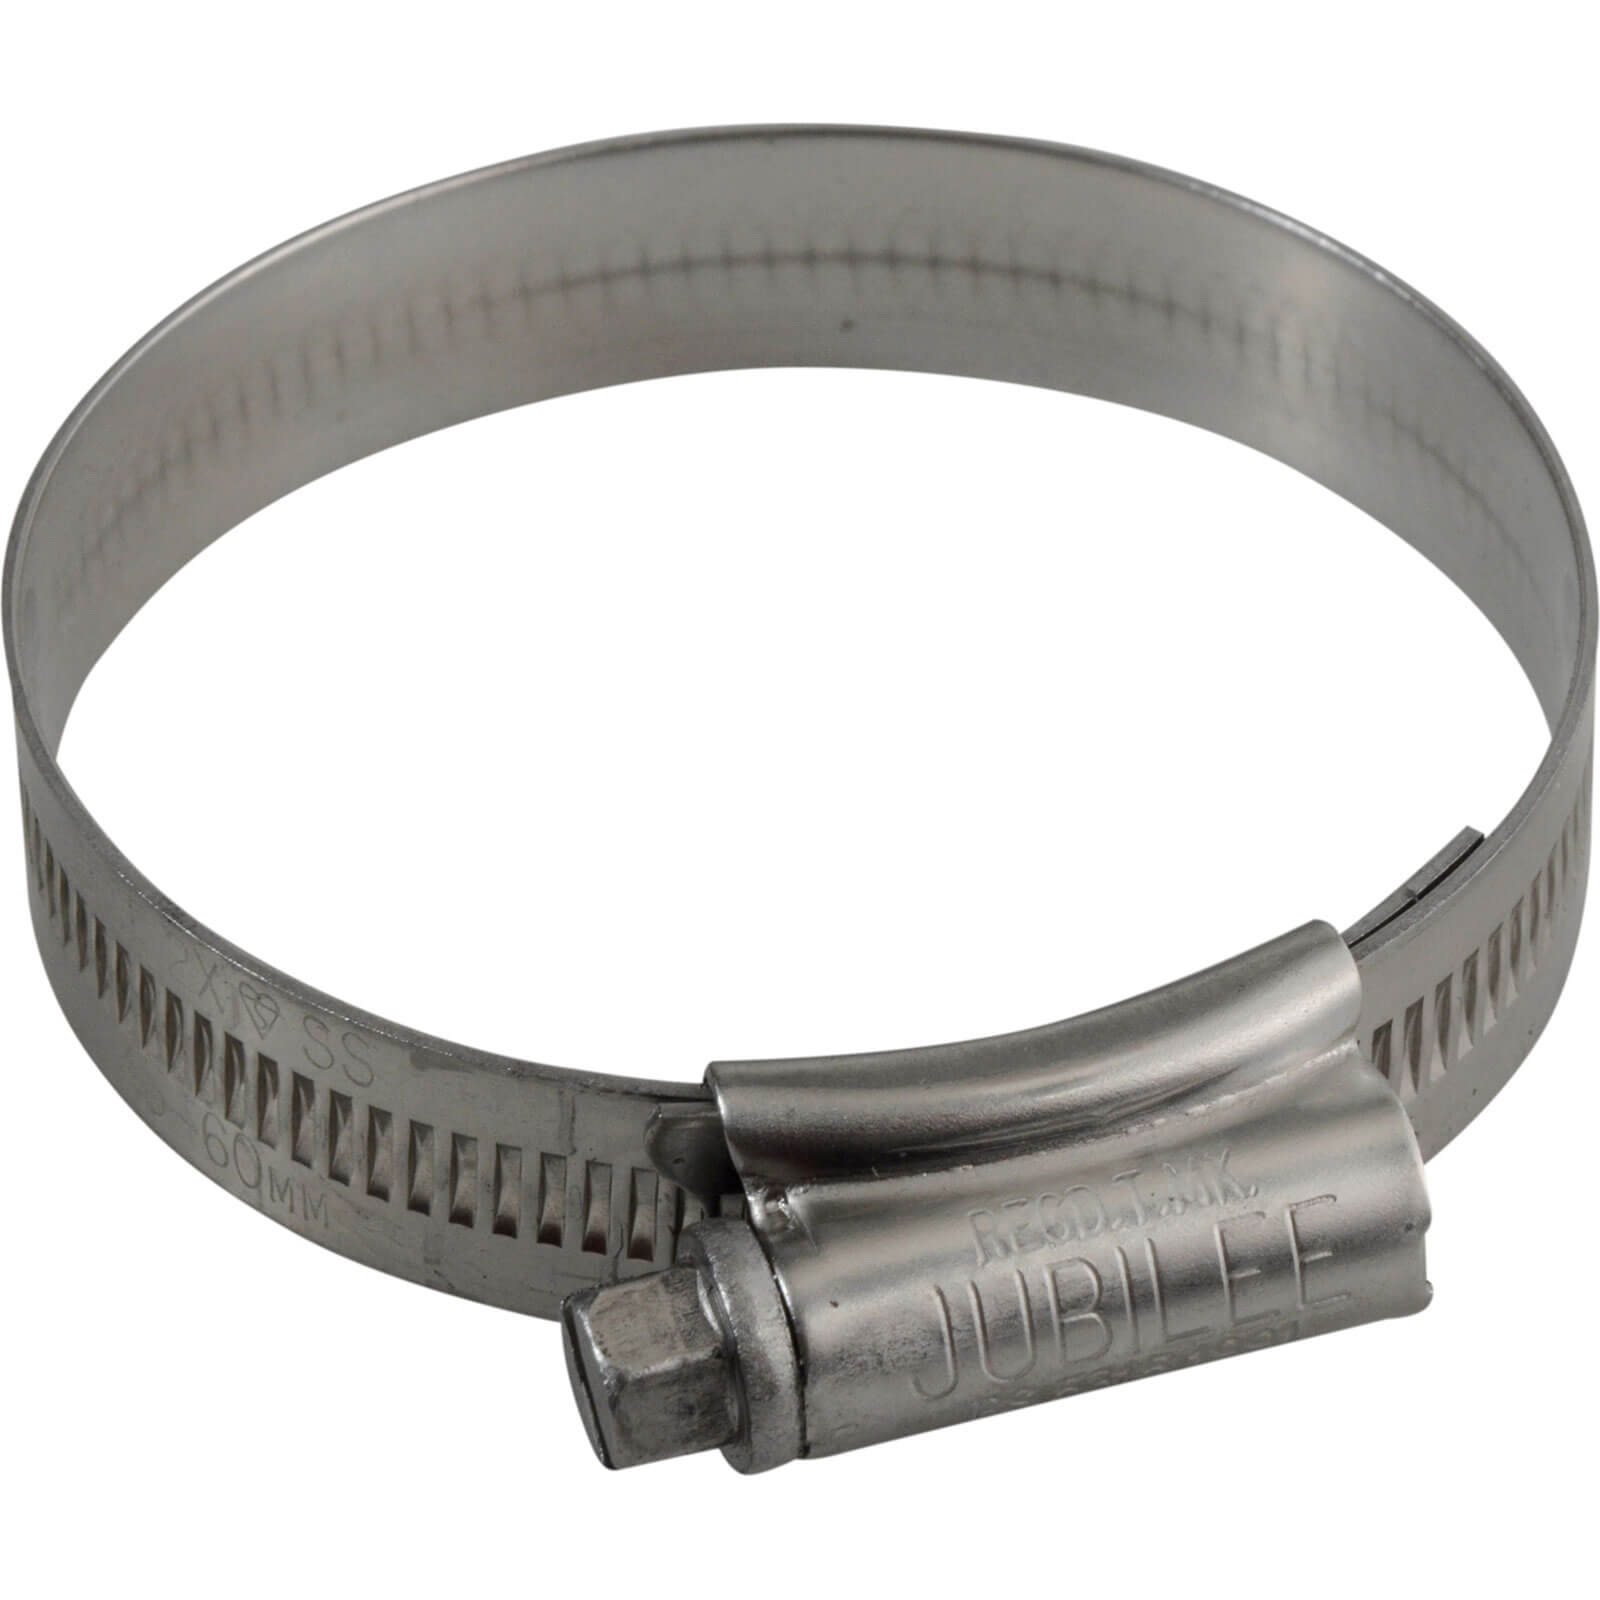 Photos - Nail / Screw / Fastener Jubilee Stainless Steel Hose Clip 45mm - 60mm Pack of 1 2XSS 